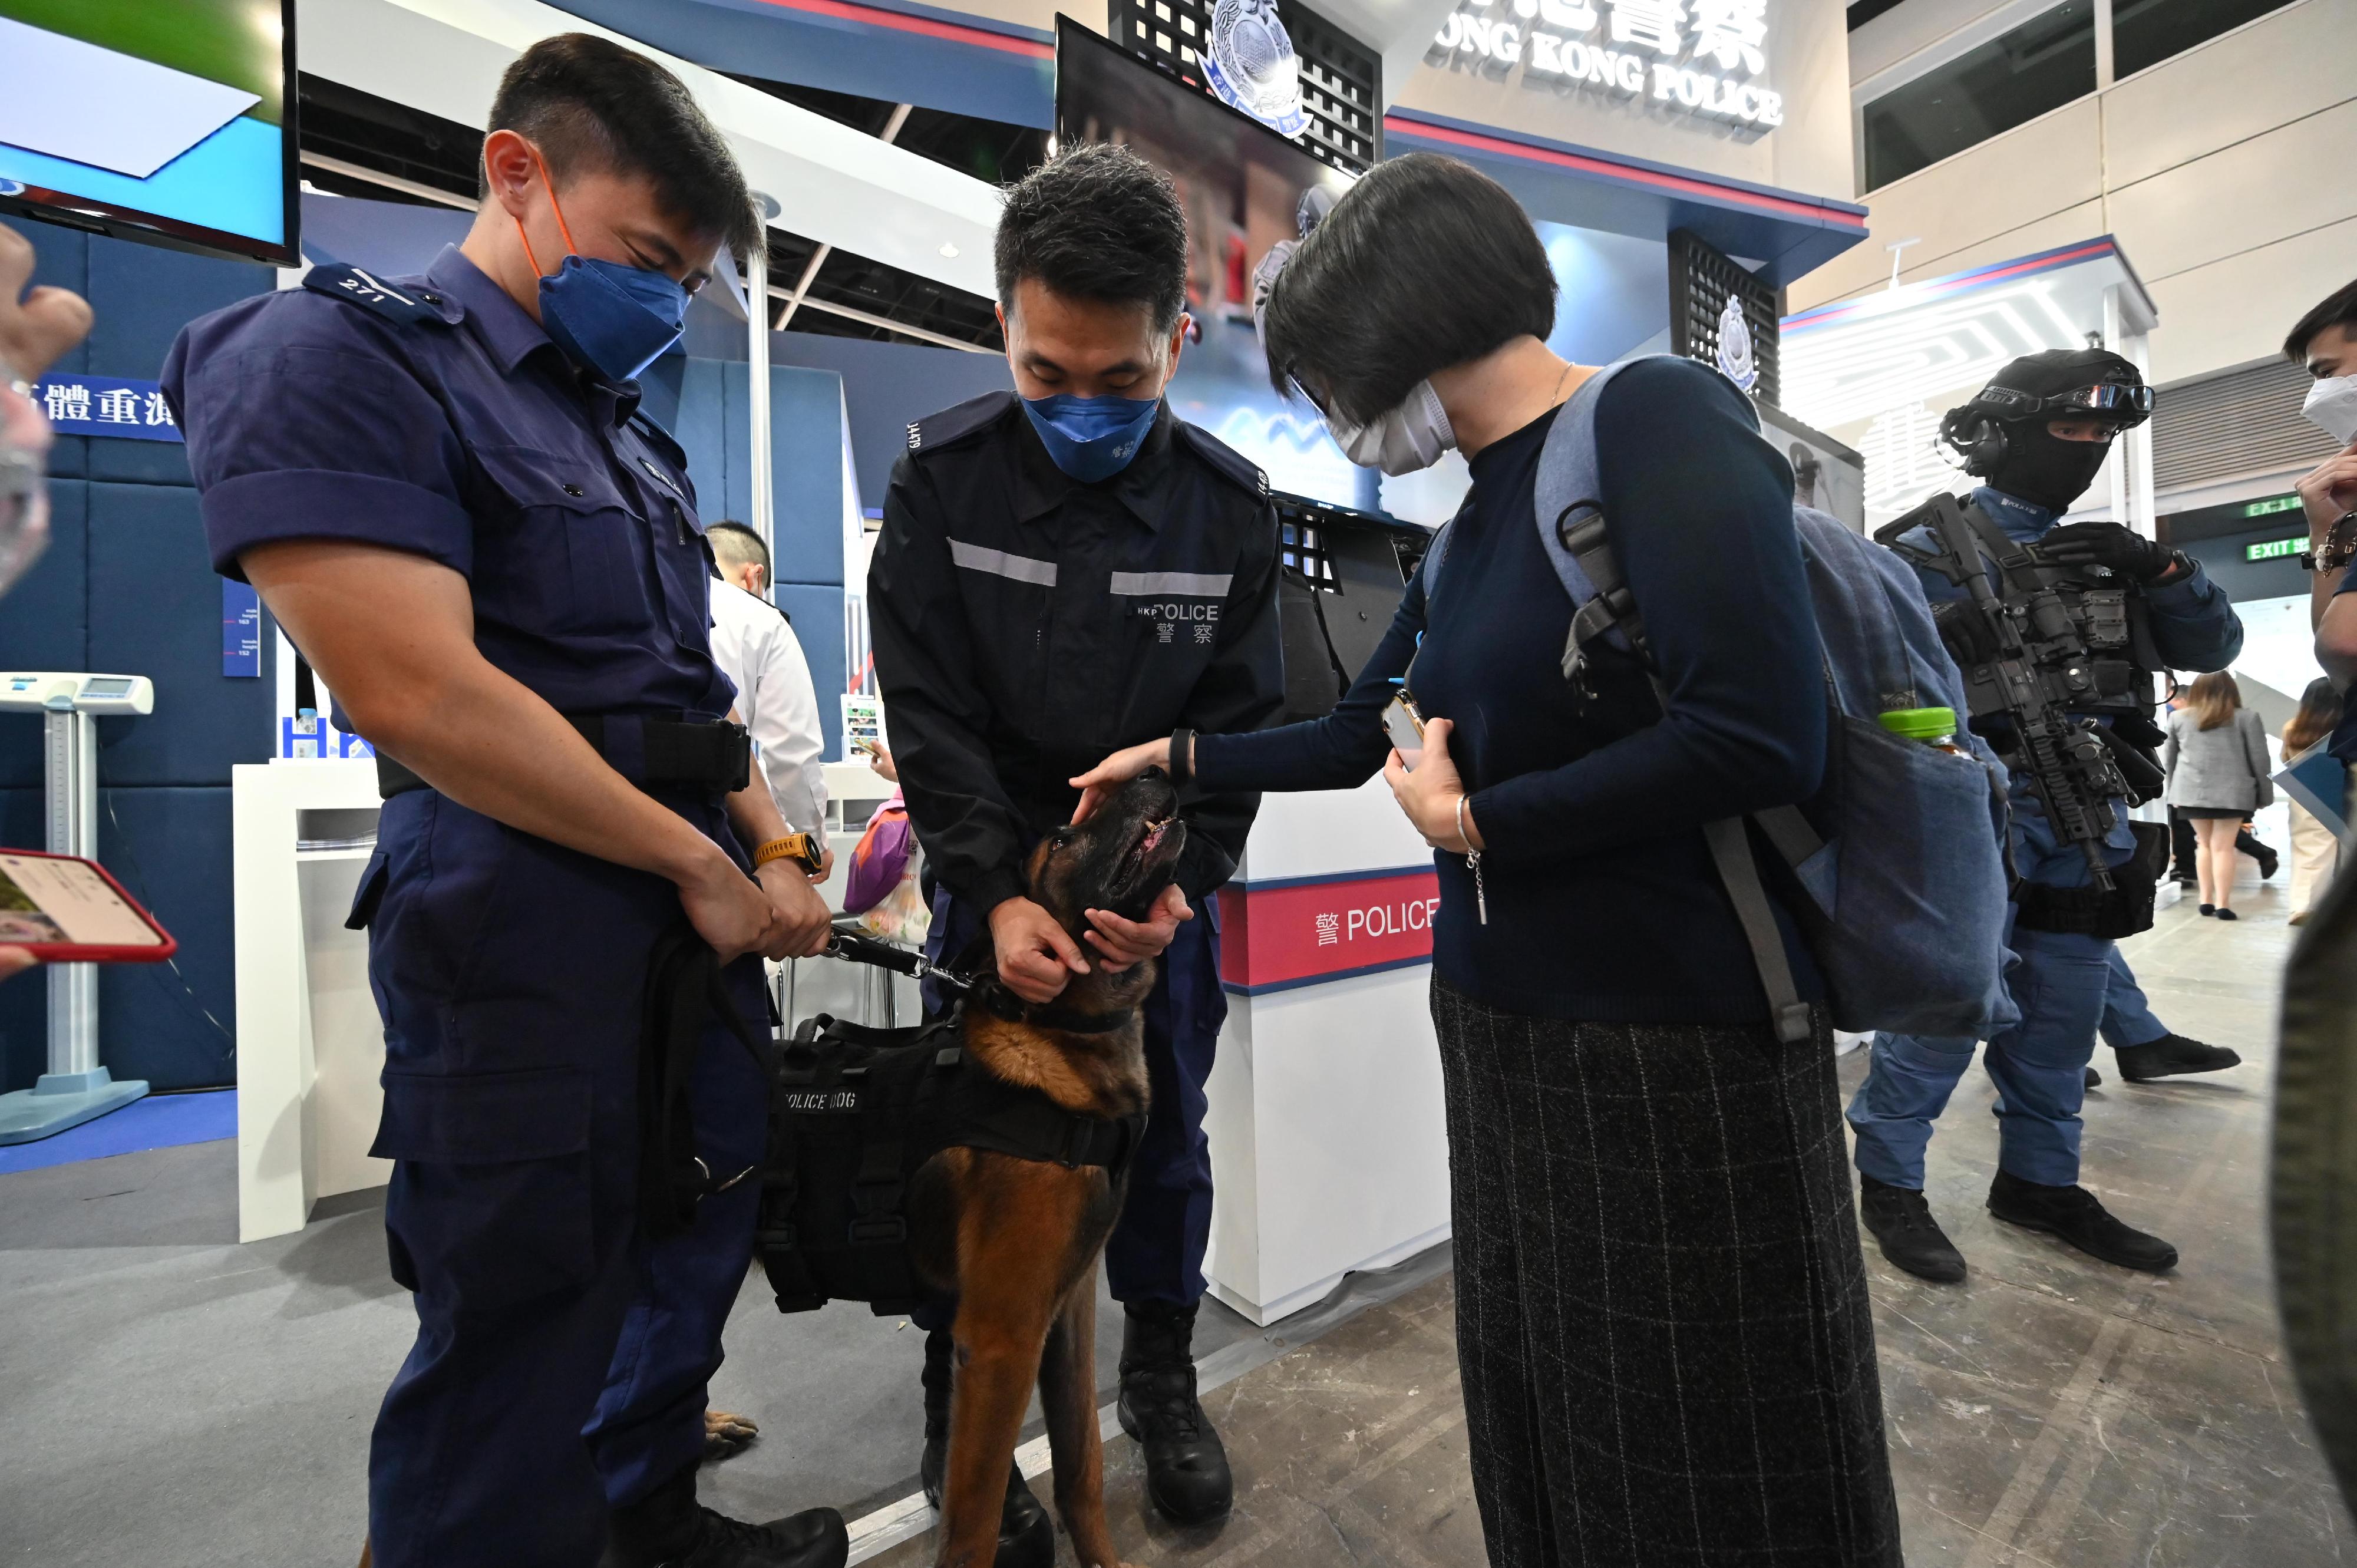 The Police Force introduces its work and provides recruitment information to visitors at the four-day Education and Careers Expo 2023 starting today (February 2). Photo shows Police Dog Unit officers briefing a visitor on their areas of work and equipment.